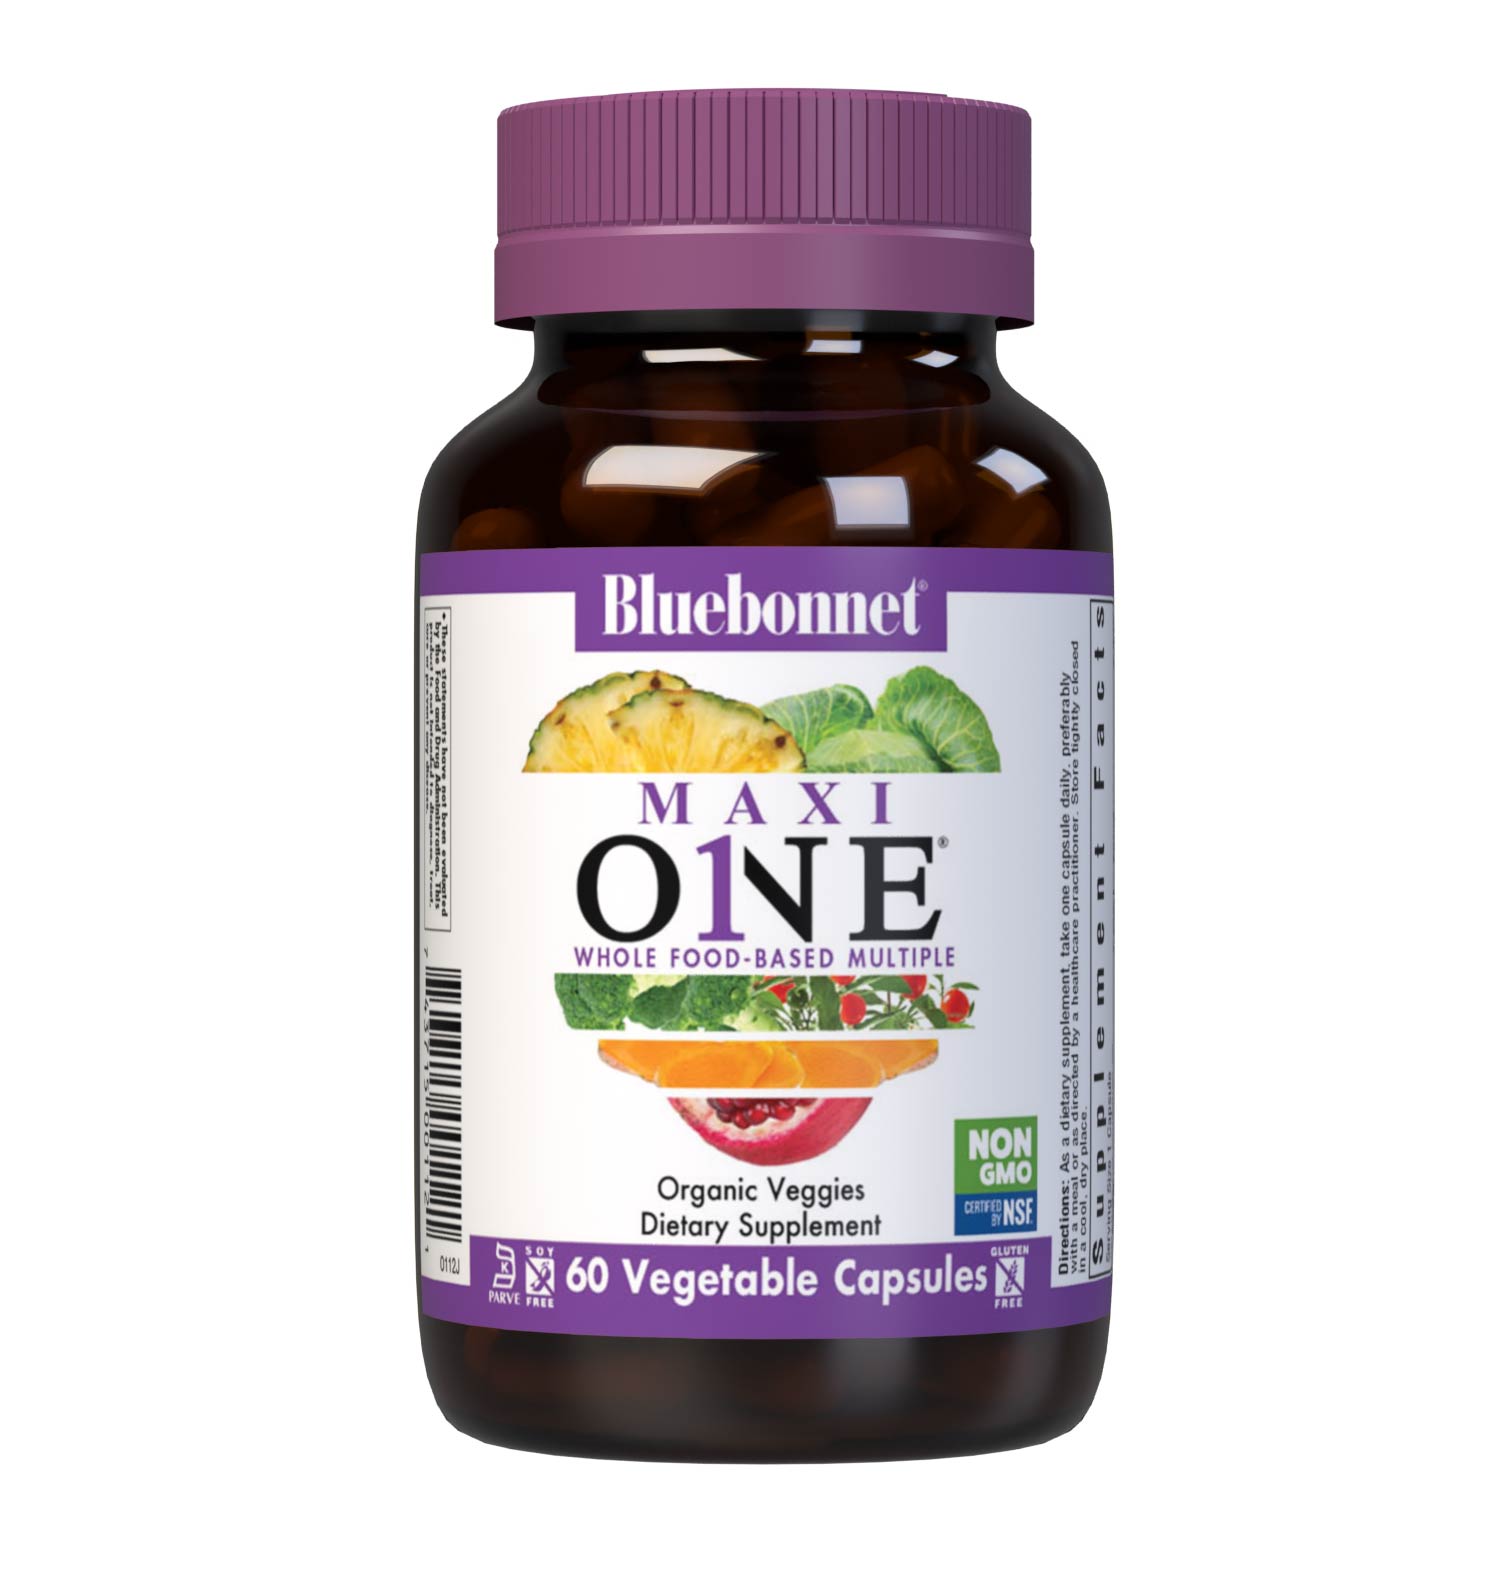 Bluebonnet’s Maxi ONE formula 60 Vegetable Capsules is a higher potency, single daily multivitamin and multimineral dietary supplement in a capsule and is formulated with highly efficient patented Albion chelated minerals, vitamin K2 from natto, select coenzyme B vitamins along with energy & vitality, organic whole food, and plant source enzyme blends. #size_60 count